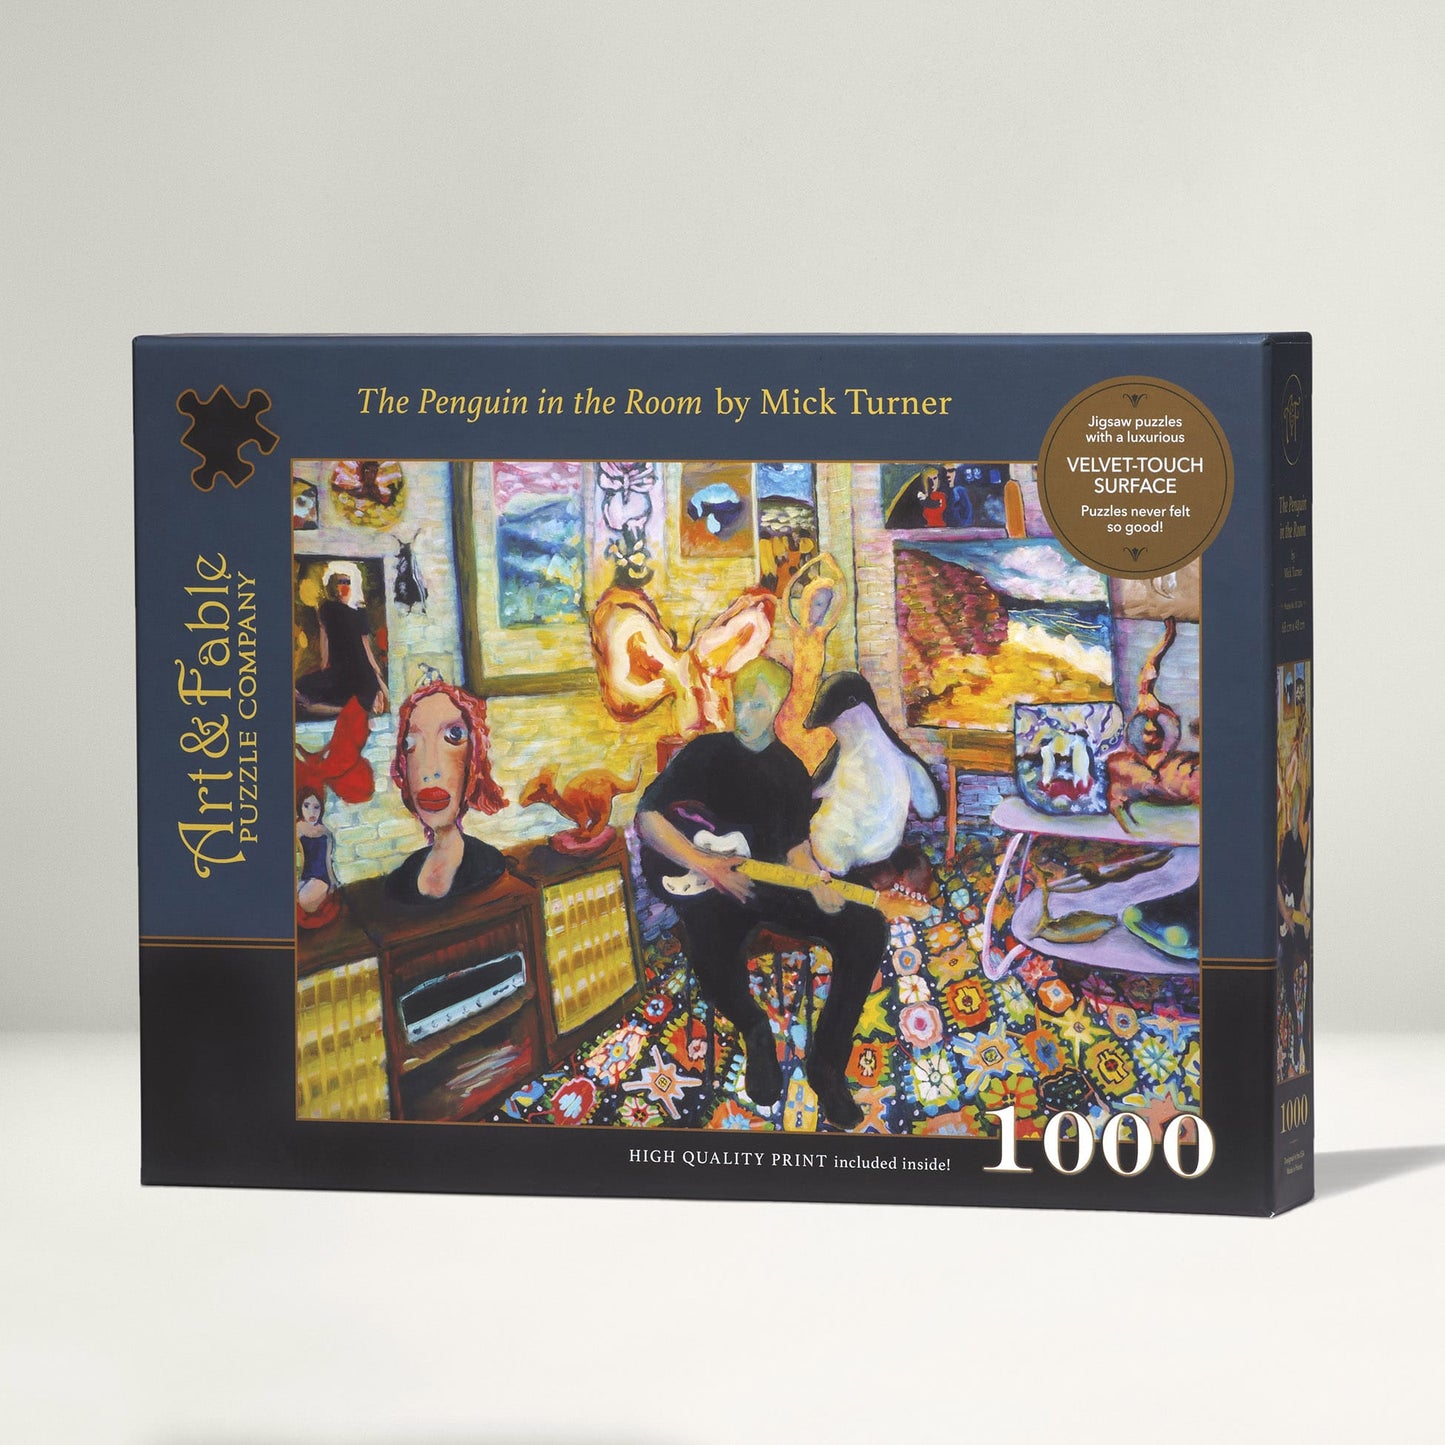 The Penguin in the Room by Mick Turner, 1000 Piece Puzzle